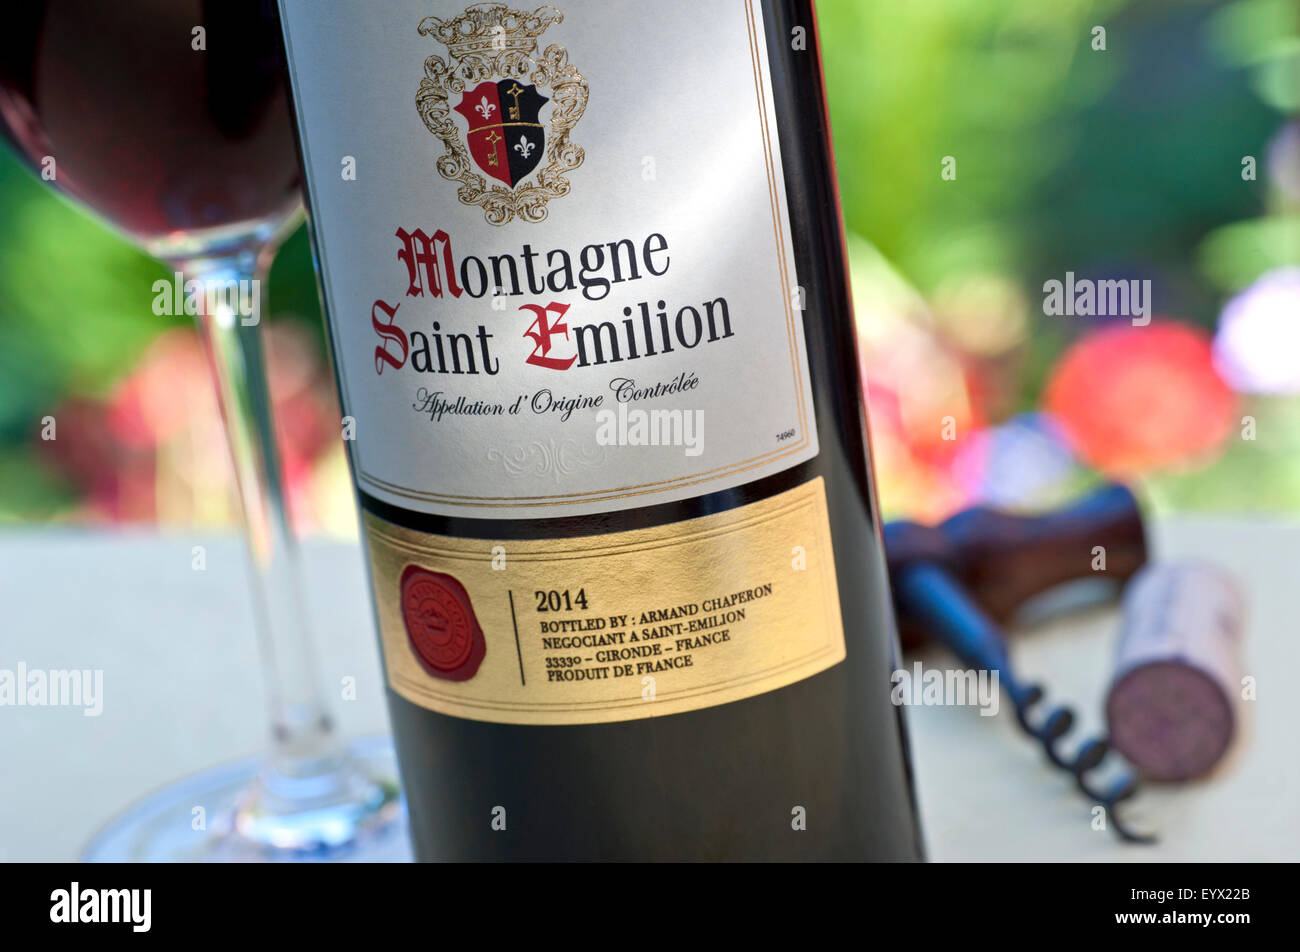 MONTAGNE SAINT EMILION Bottle and glass of  2014 Montagne Saint-Emilion wine in alfresco wine tasting situation on garden terrace table Stock Photo